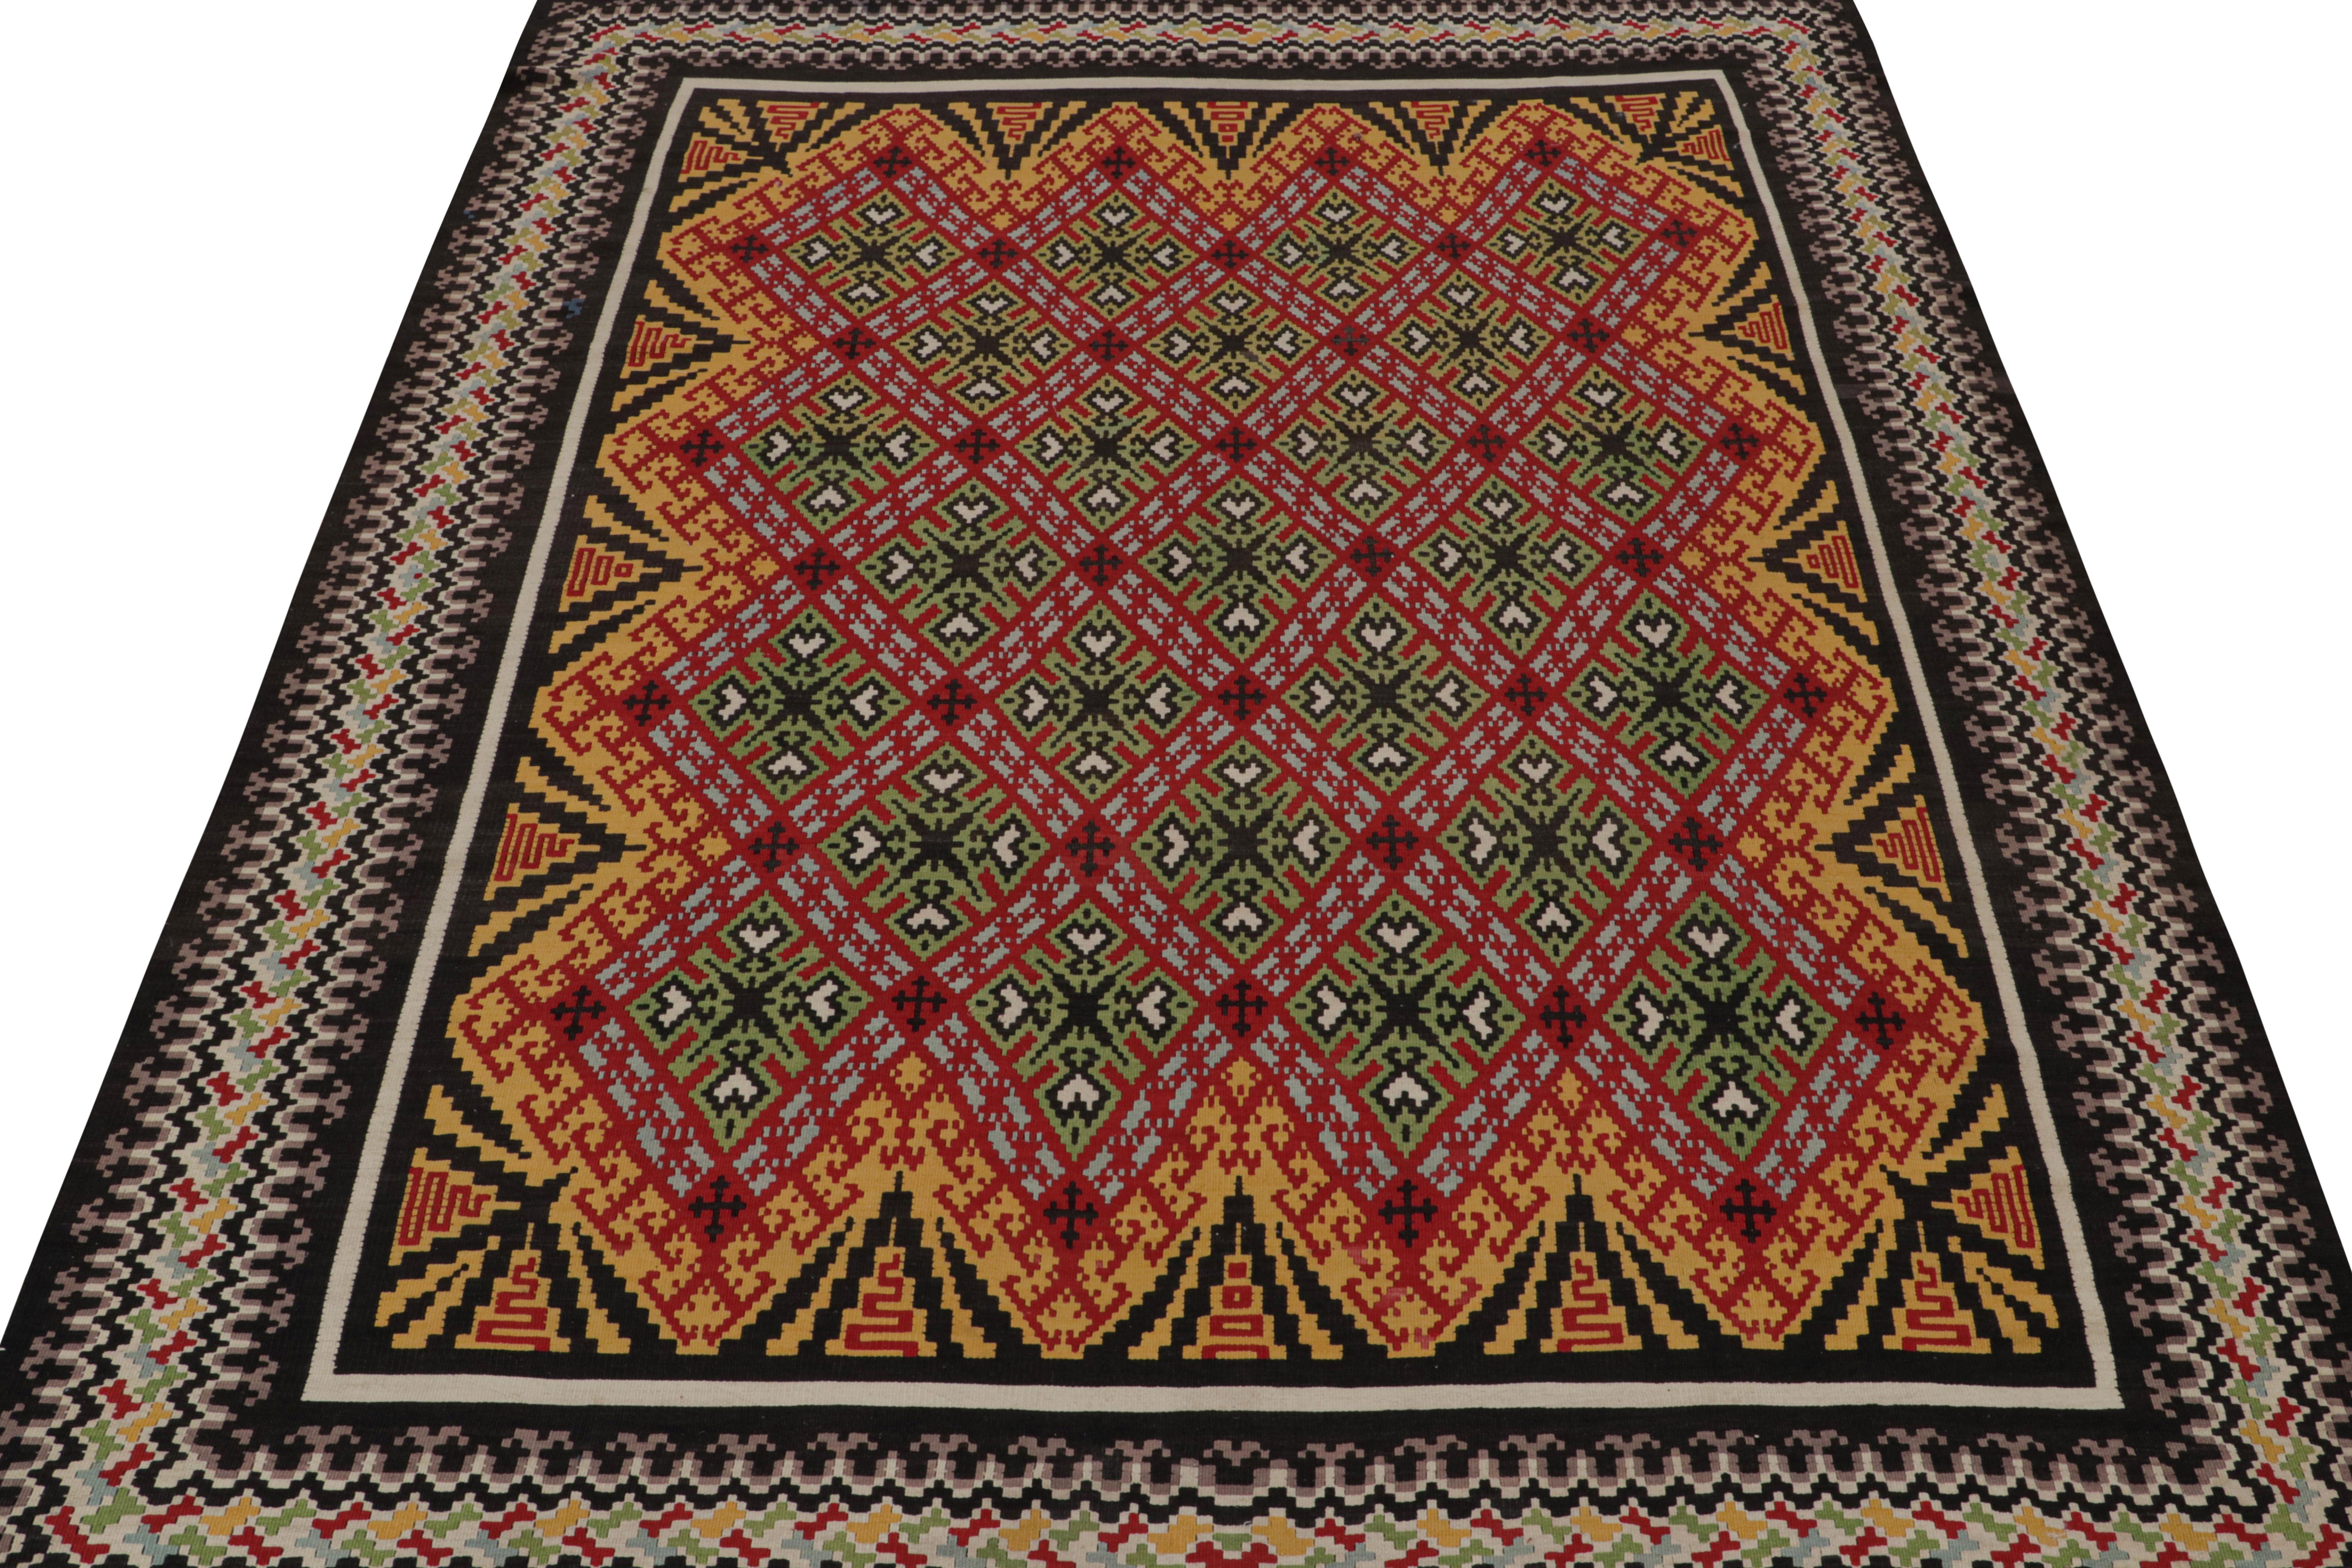 Tribal Vintage Balkan Kilim with Gold, Red & Green Geometric Patterns from Rug & Kilim For Sale